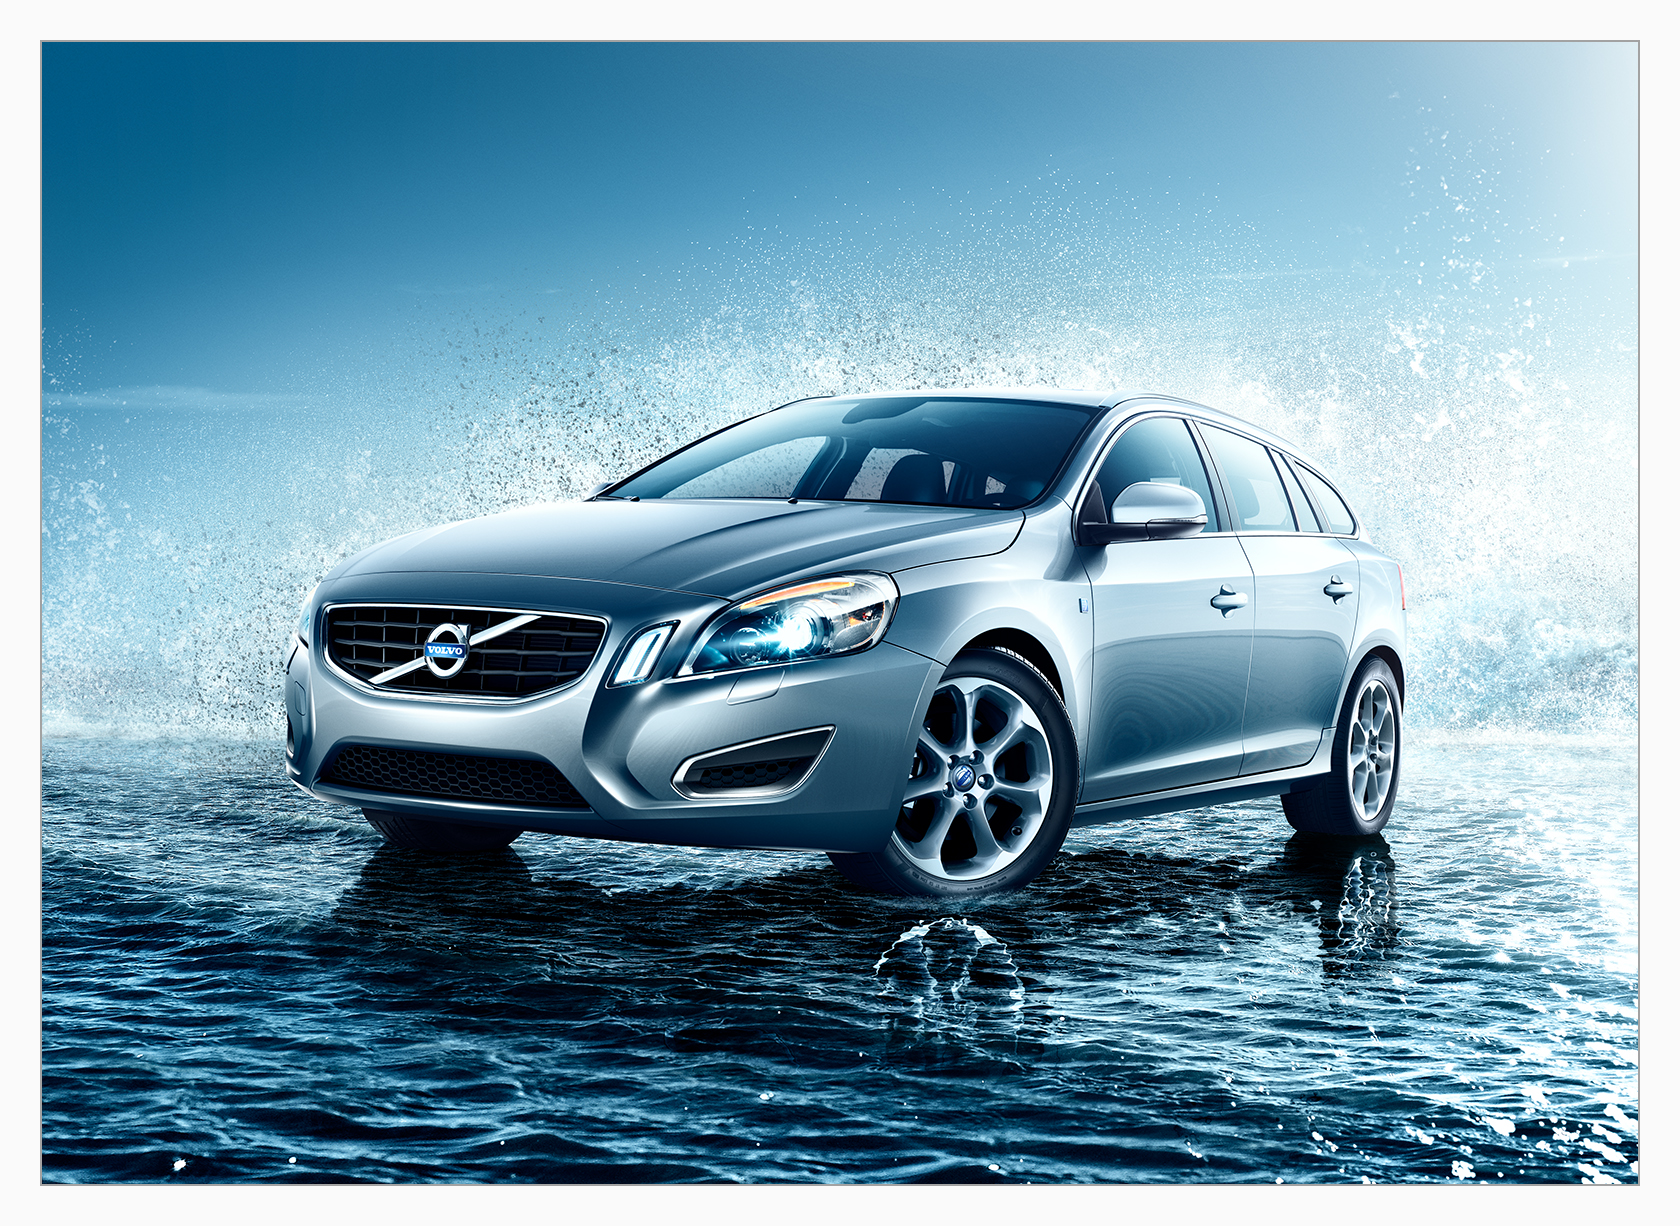 Oceanrace_volvo_V60_Featured